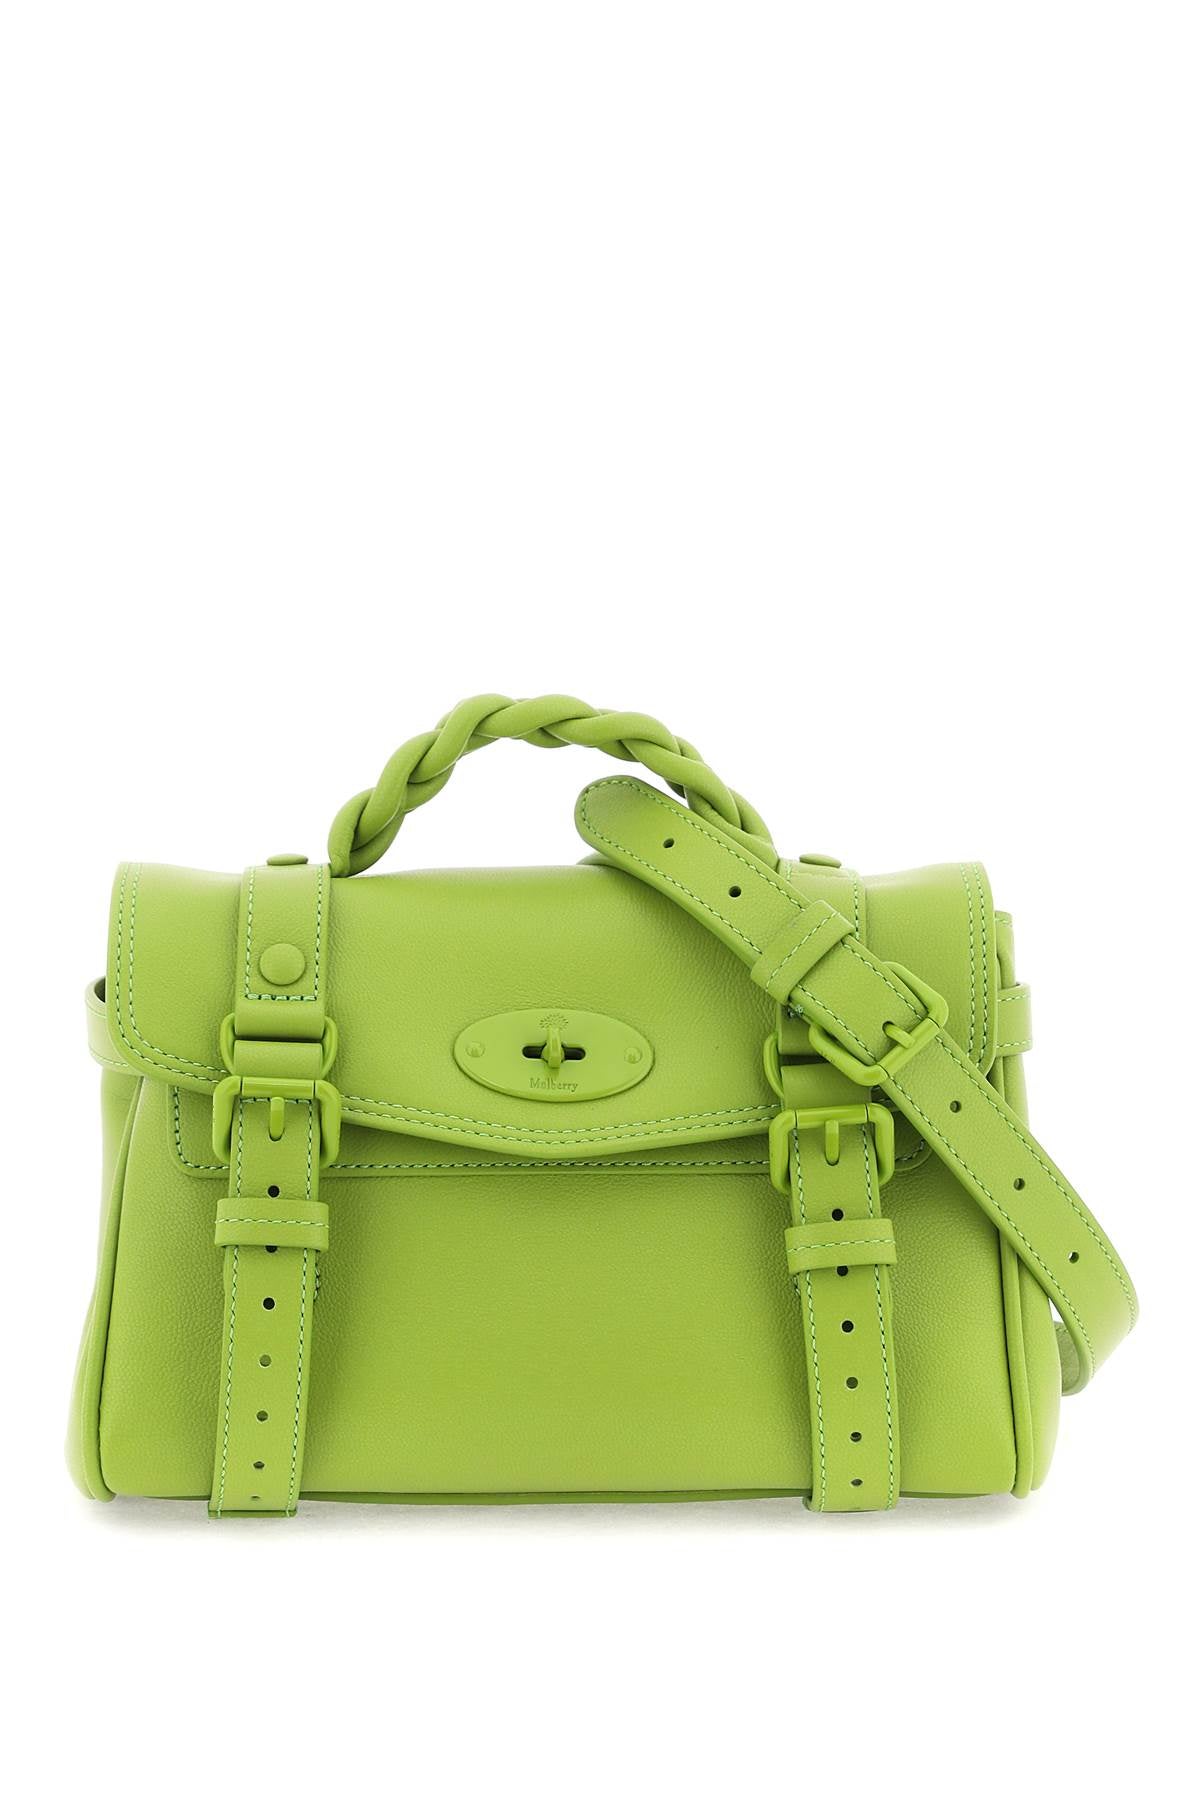 MULBERRY Mini Alexa Green Leather Clutch with Braided Handle and Iconic Metal Closure